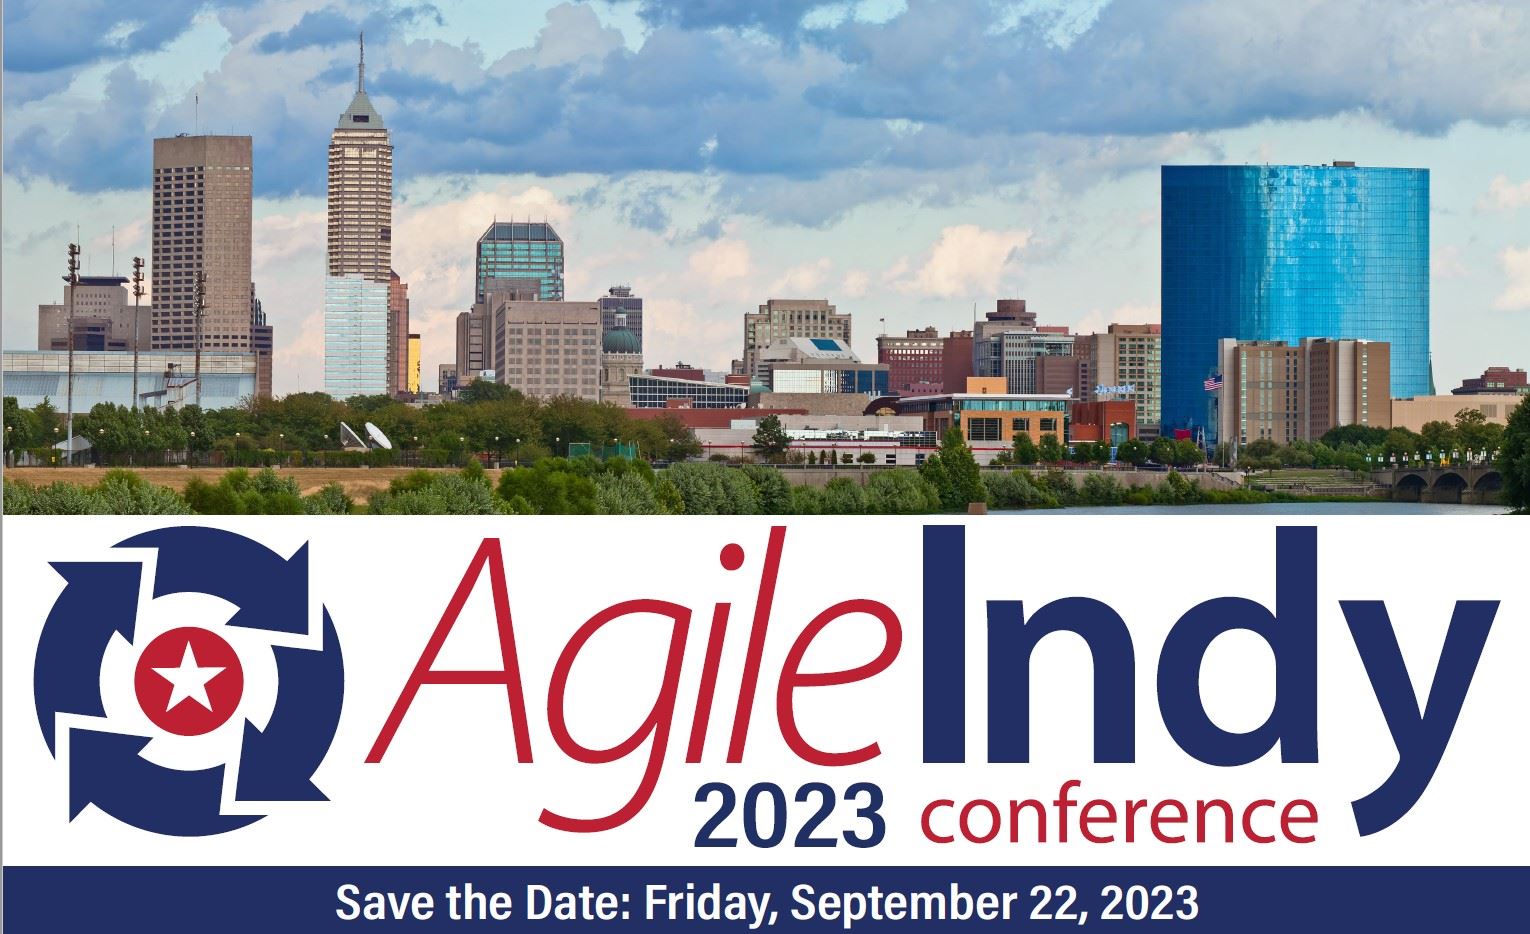 You are currently viewing Agile Indy 2023 – Indianapolis